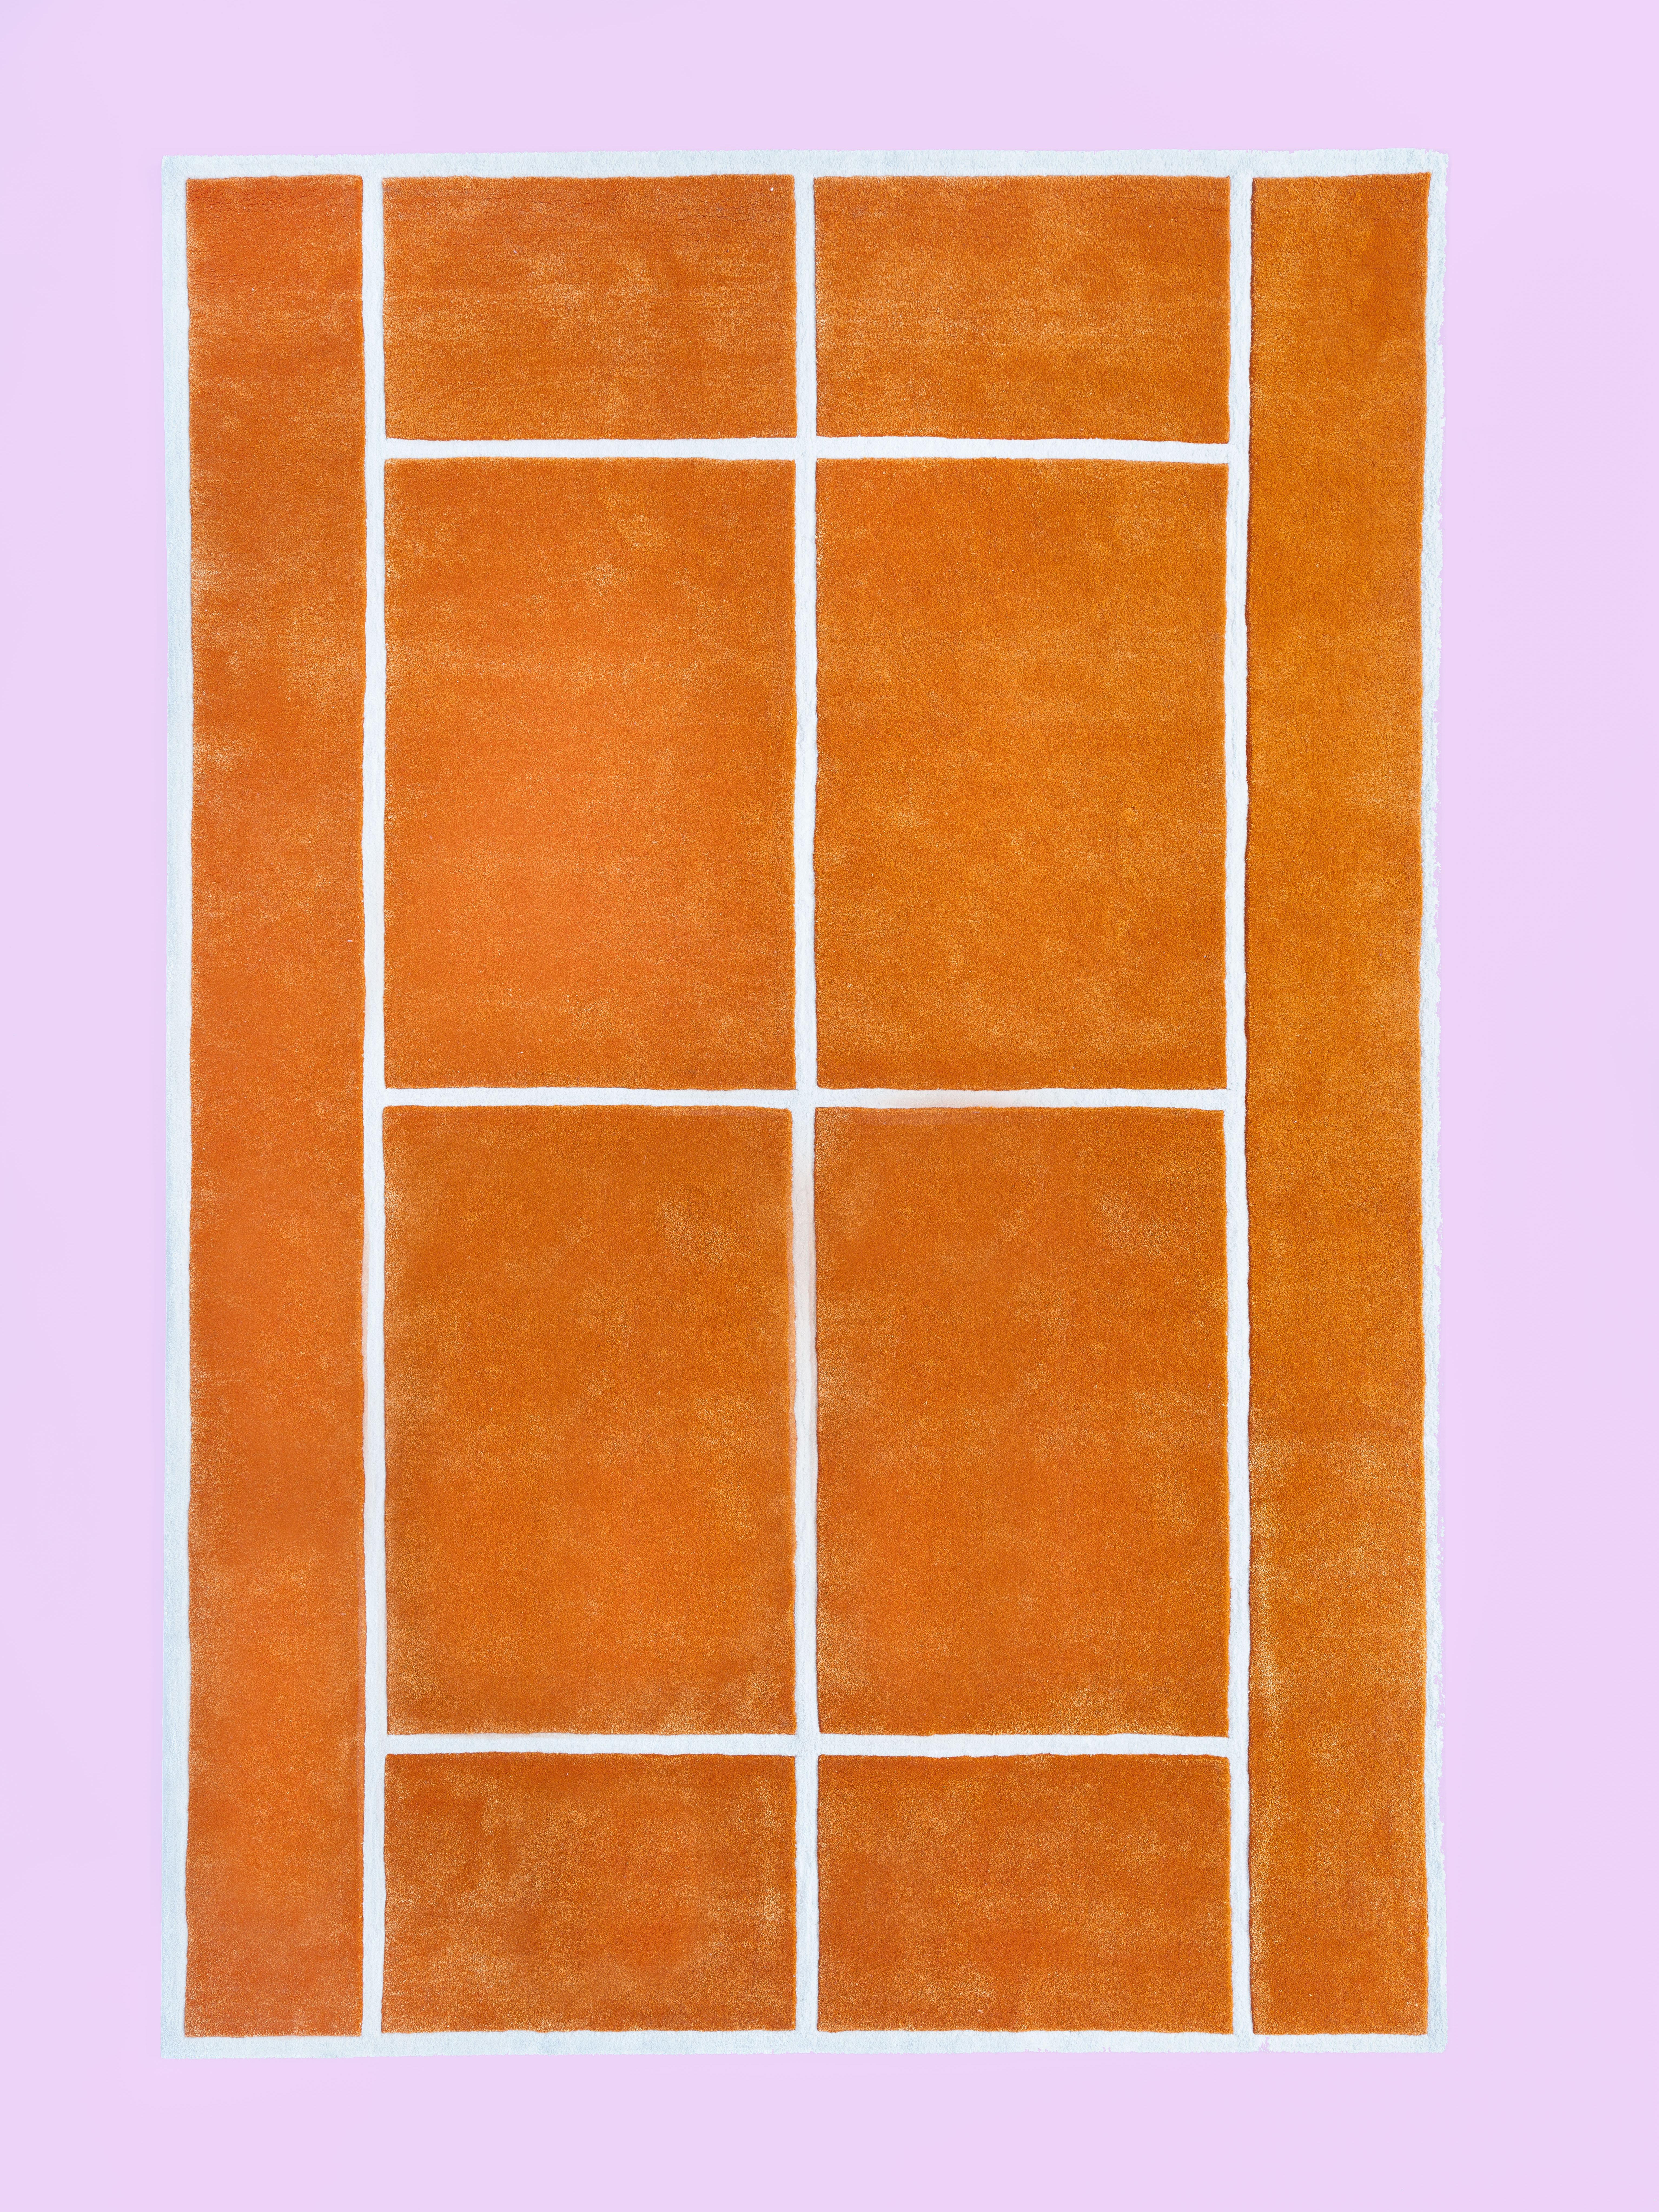 The “Court Series” rugs are hand tufted with blended wool and viscose material dyed in hyper-saturated colors, with tennis court-like geometries represented both via overlaid graphics as well as the cut and shape of individual segments.
Handmade in